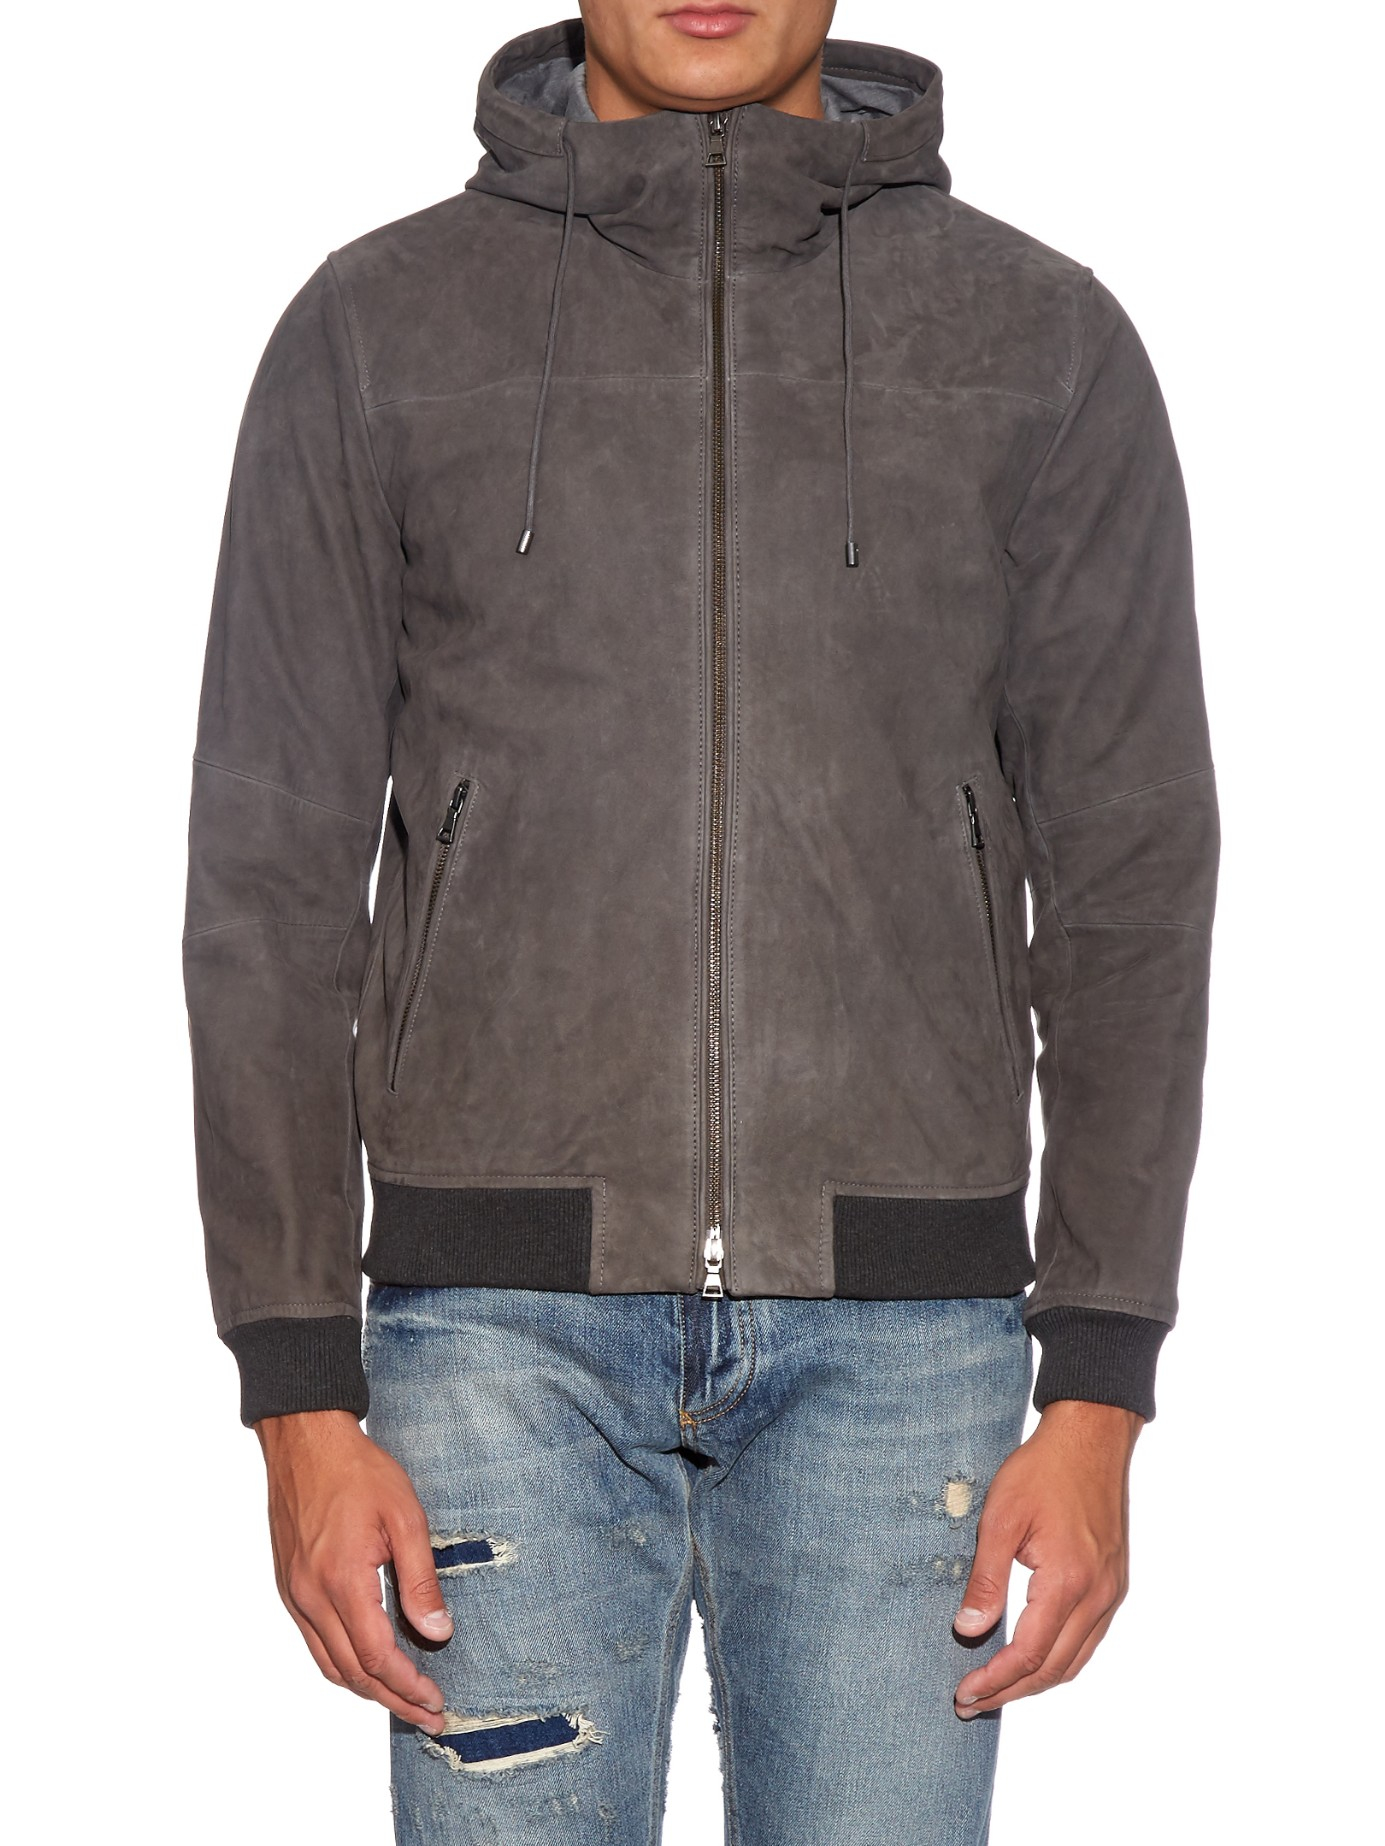 Lyst - Vince Hooded Suede Jacket in Gray for Men